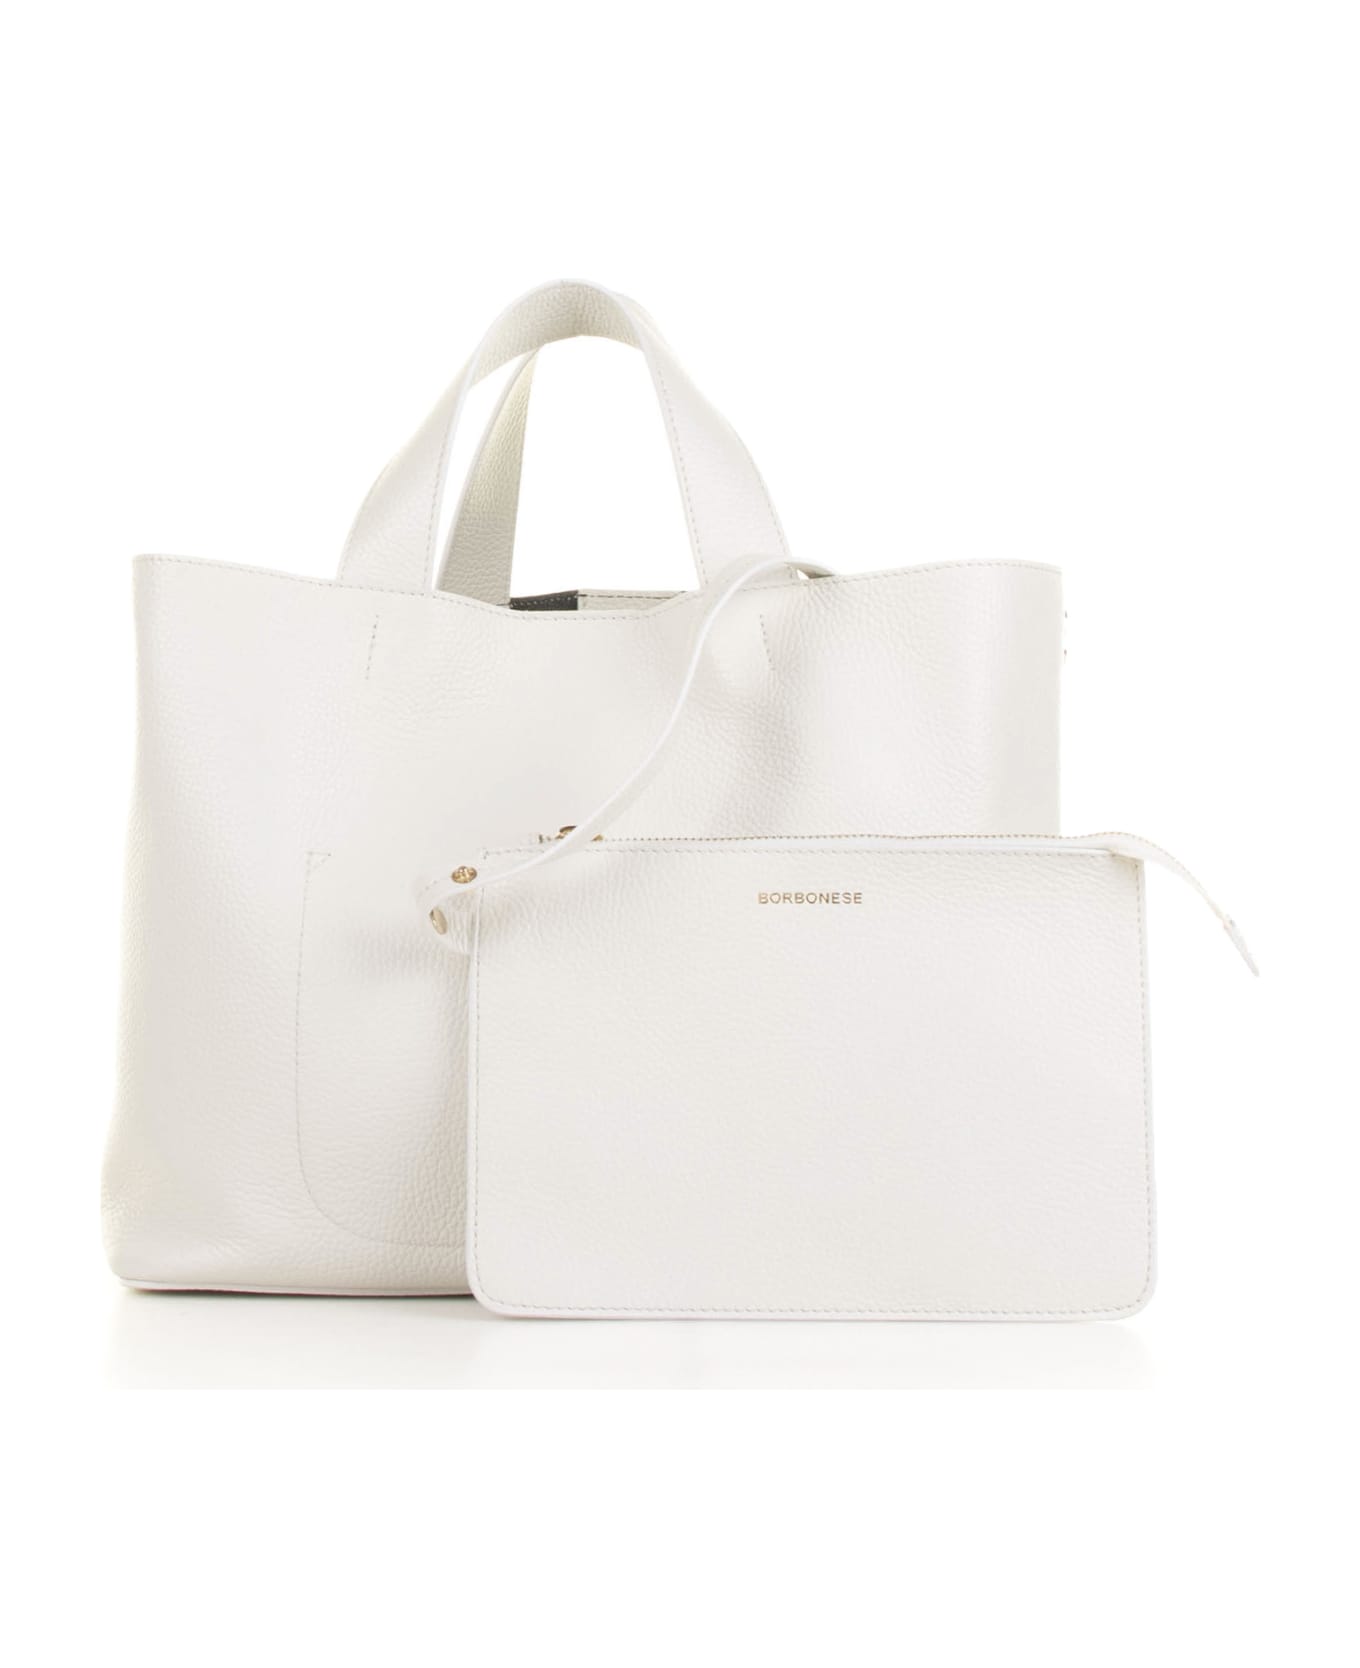 Borbonese Leather Shoulder Bag With Logo - CHANTILLY CREAM